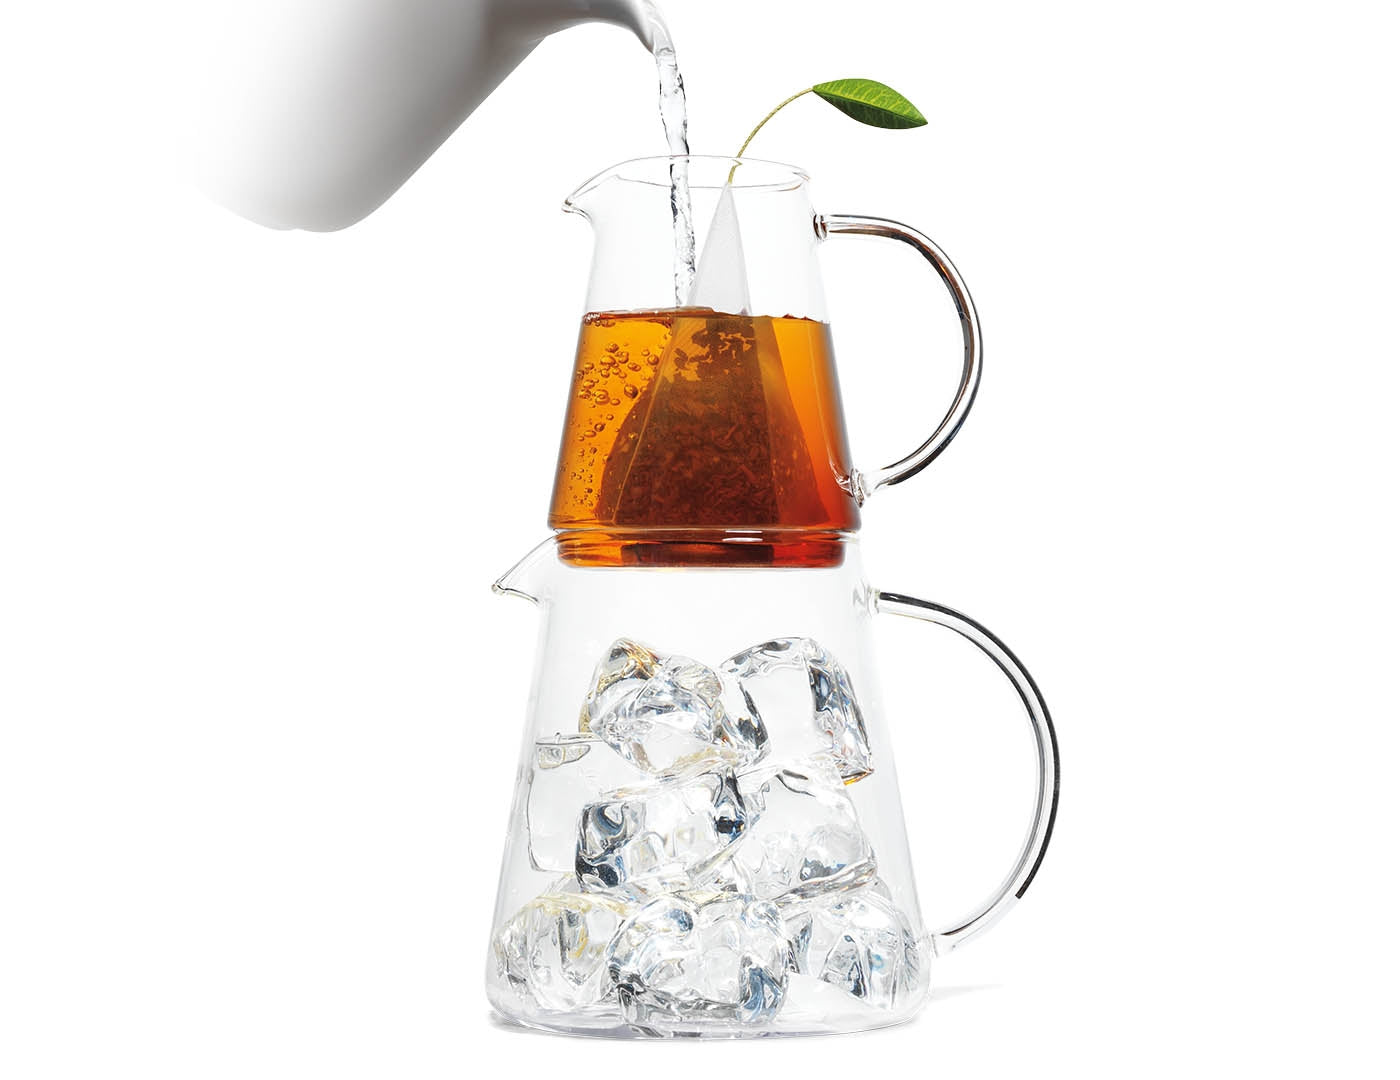 Poring hot water into a Tea Over Ice Pitcher Set